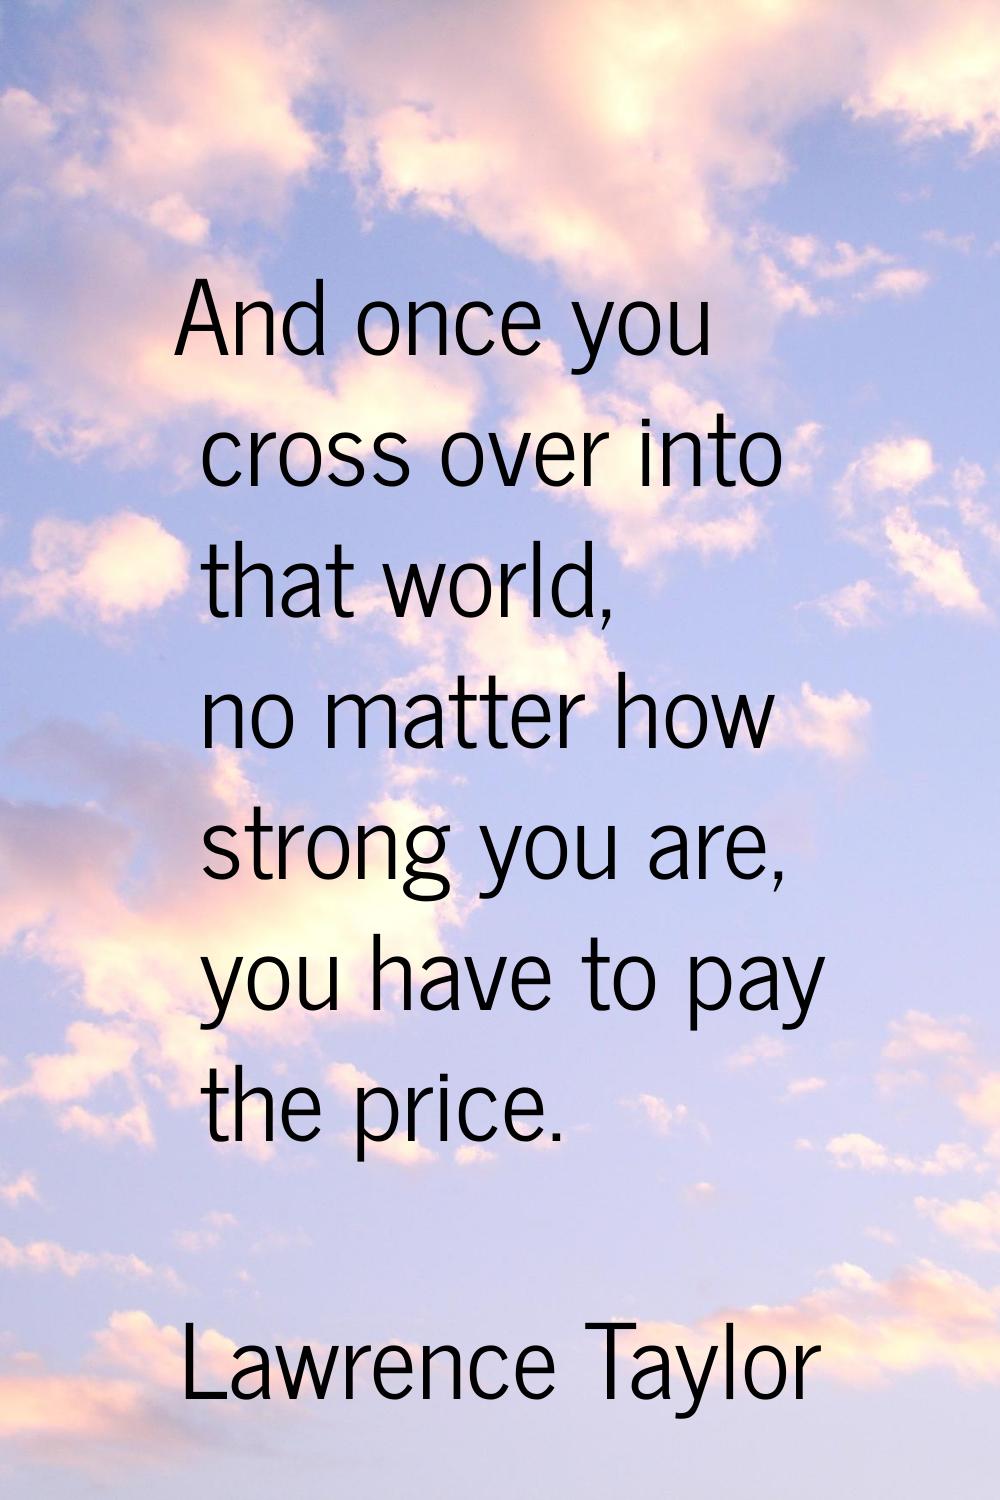 And once you cross over into that world, no matter how strong you are, you have to pay the price.